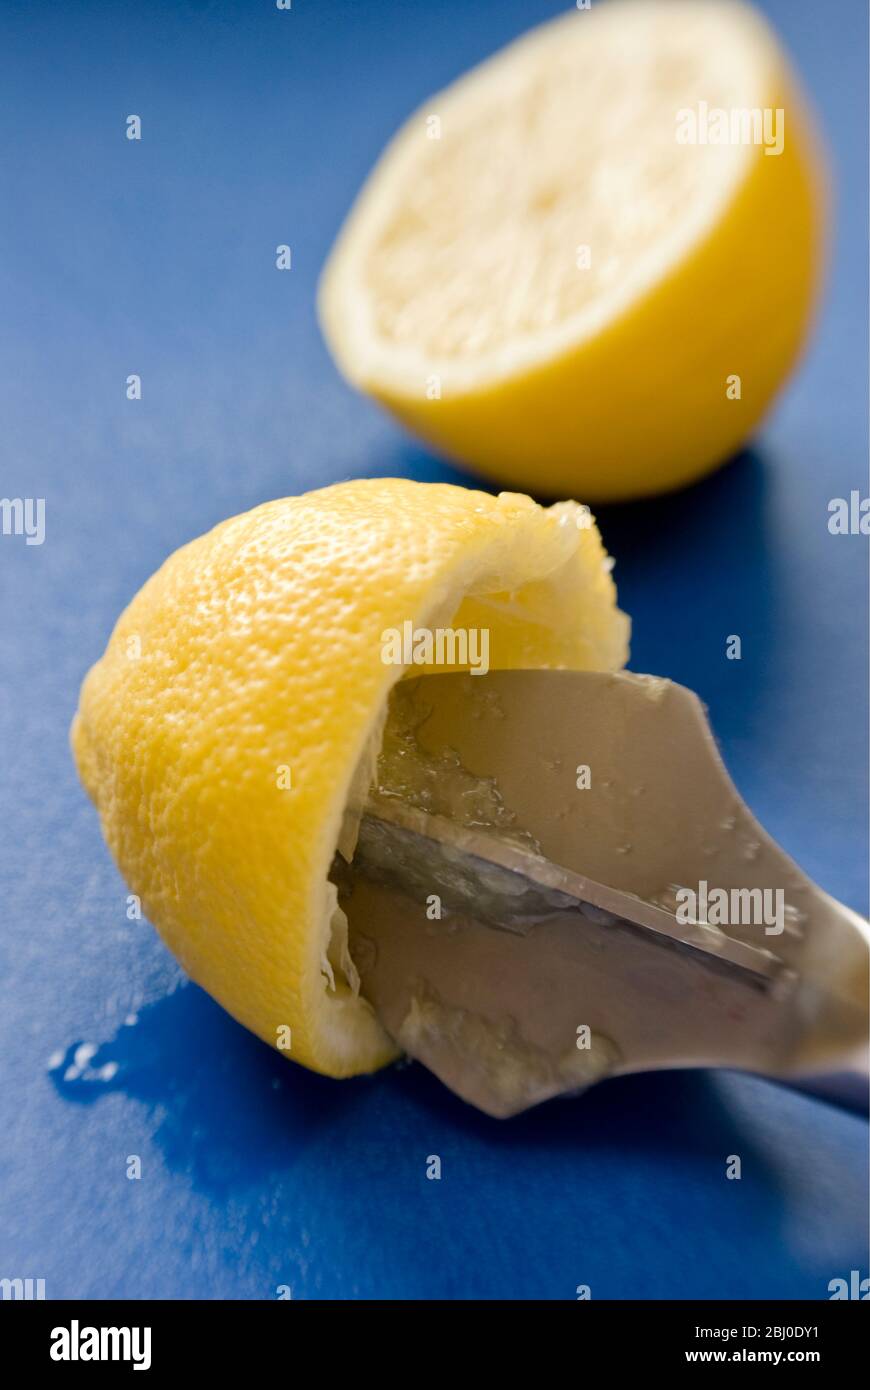 Squeezing halved elmon with reamer on blue surface - Stock Photo